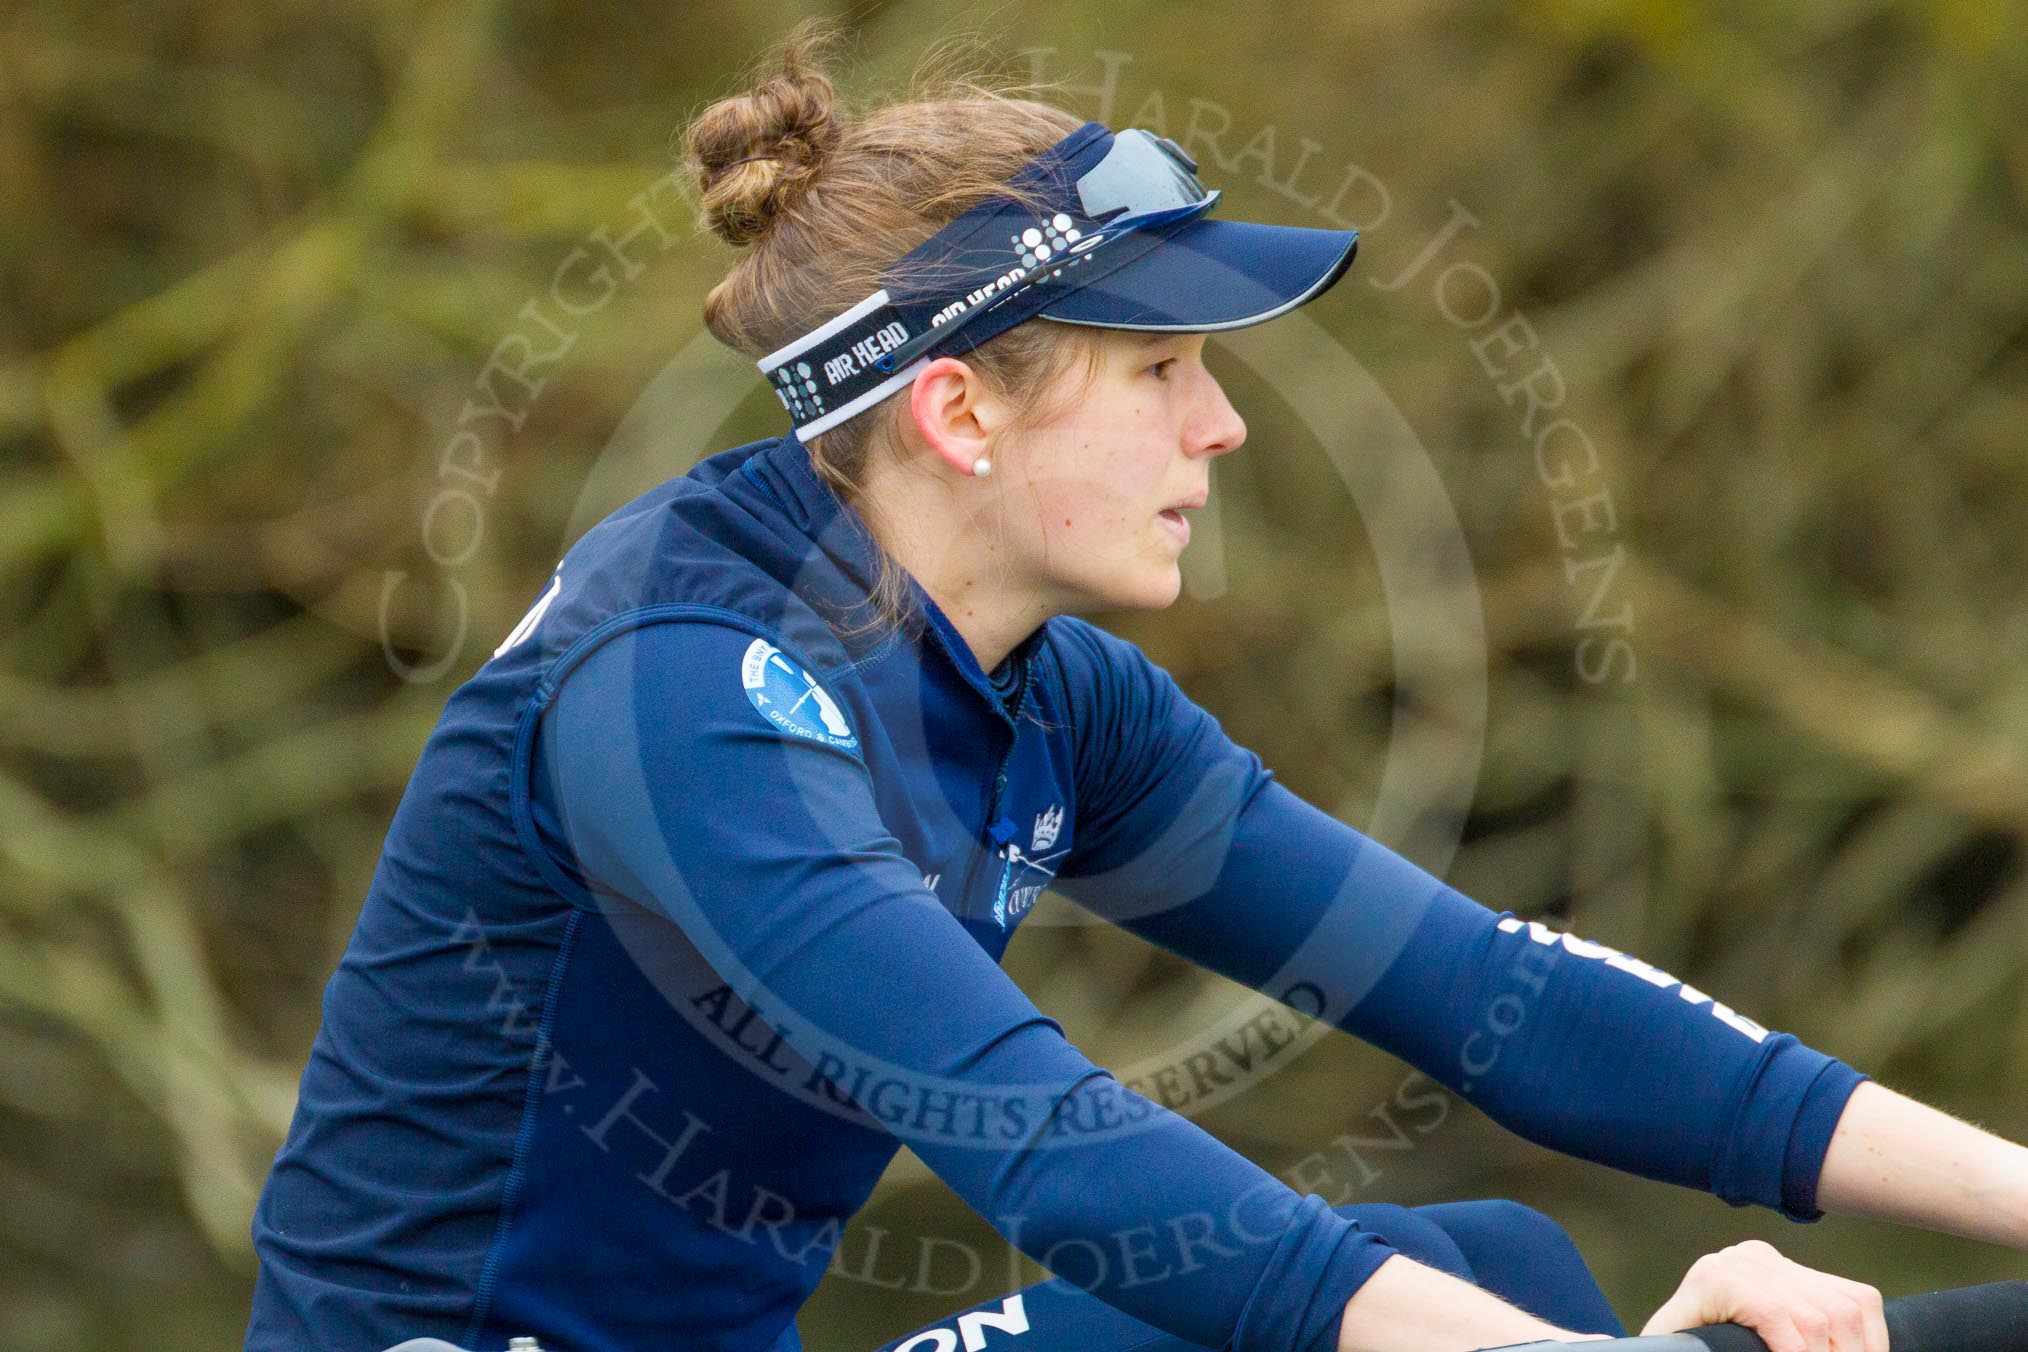 The Boat Race season 2016 - OUWBC training Wallingford: emma Lukasiewicz, bow in the OUWBC Blue Boat.
River Thames,
Wallingford,
Oxfordshire,

on 29 February 2016 at 16:07, image #84